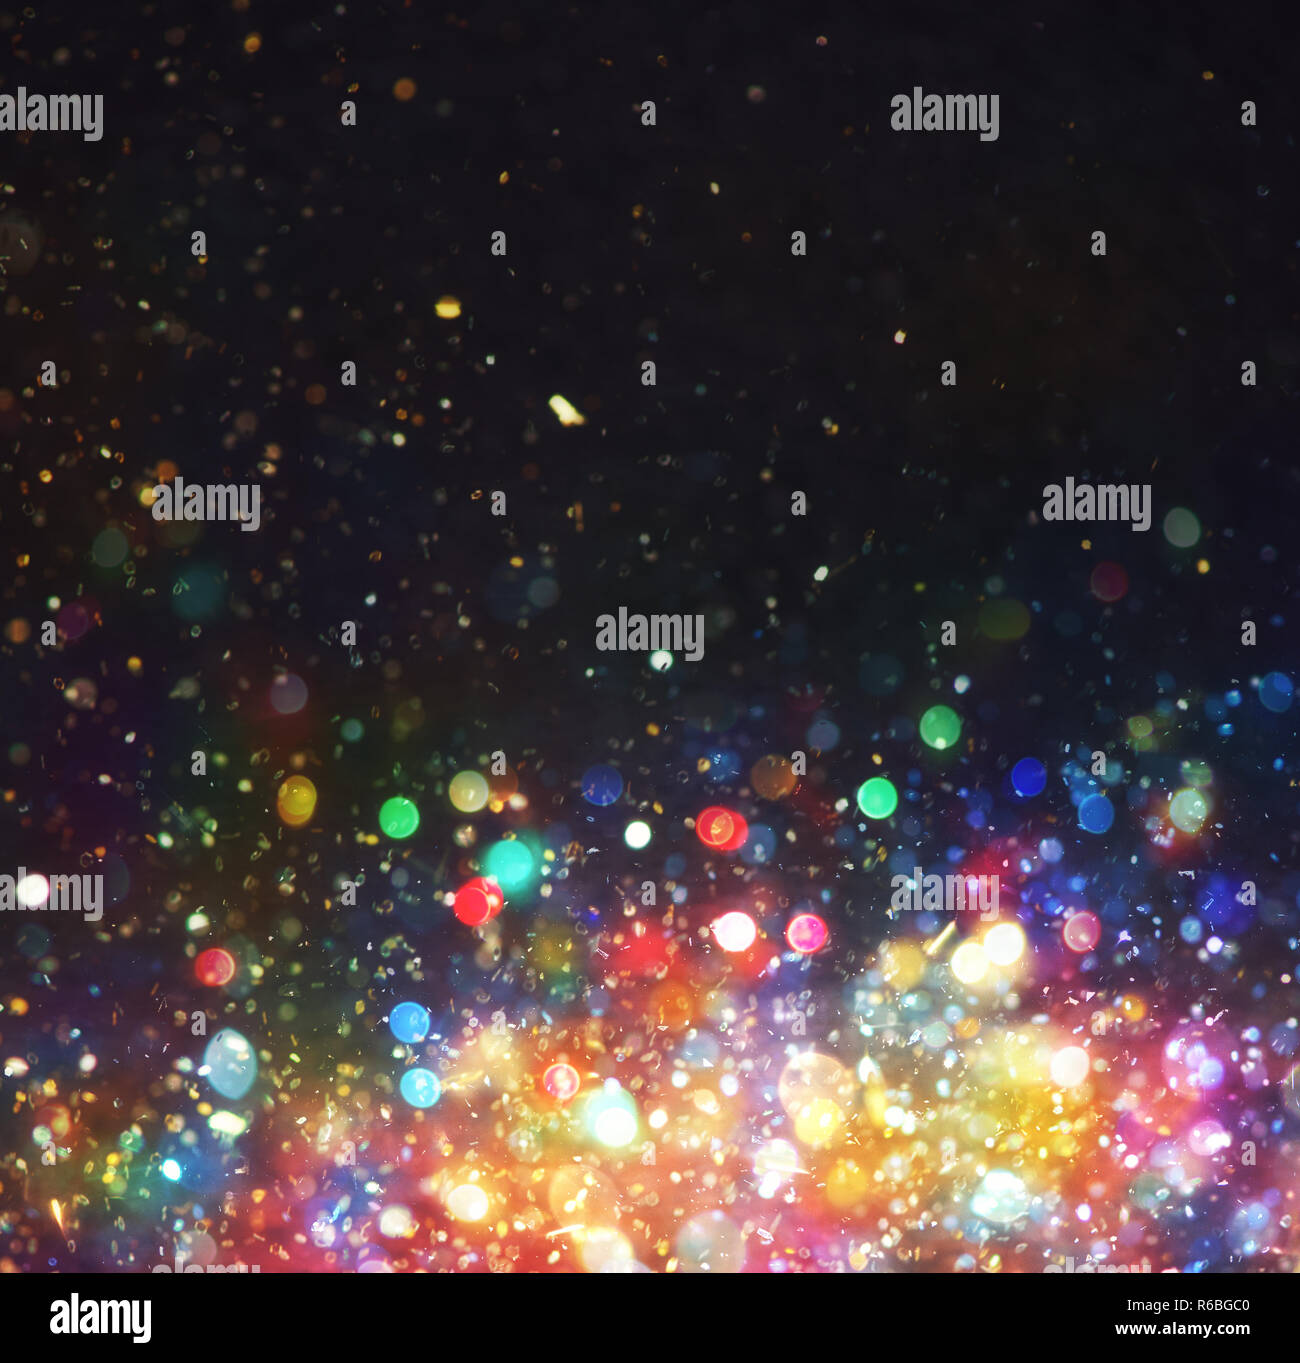 Abstract Christmas background with colorful lights in the night Stock Photo